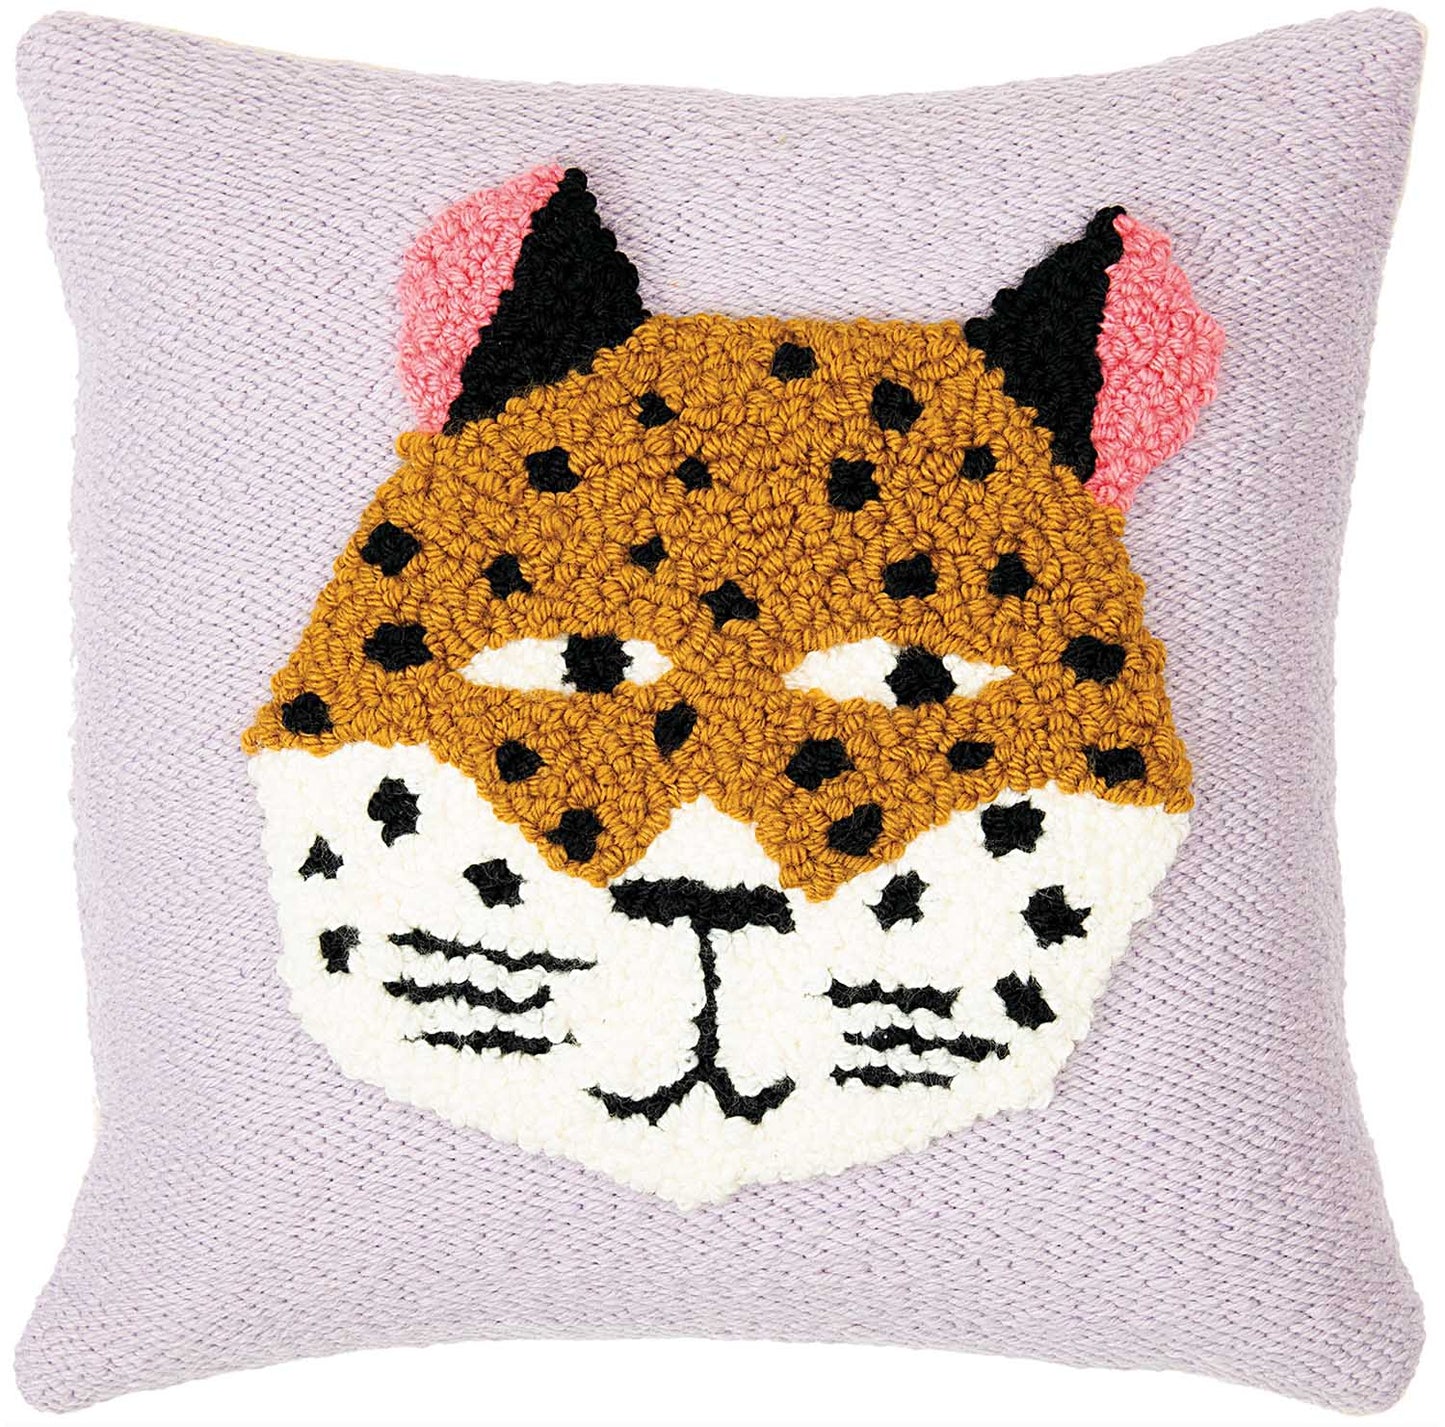 Leopard Pillow Punch Needle Kit - homesewn